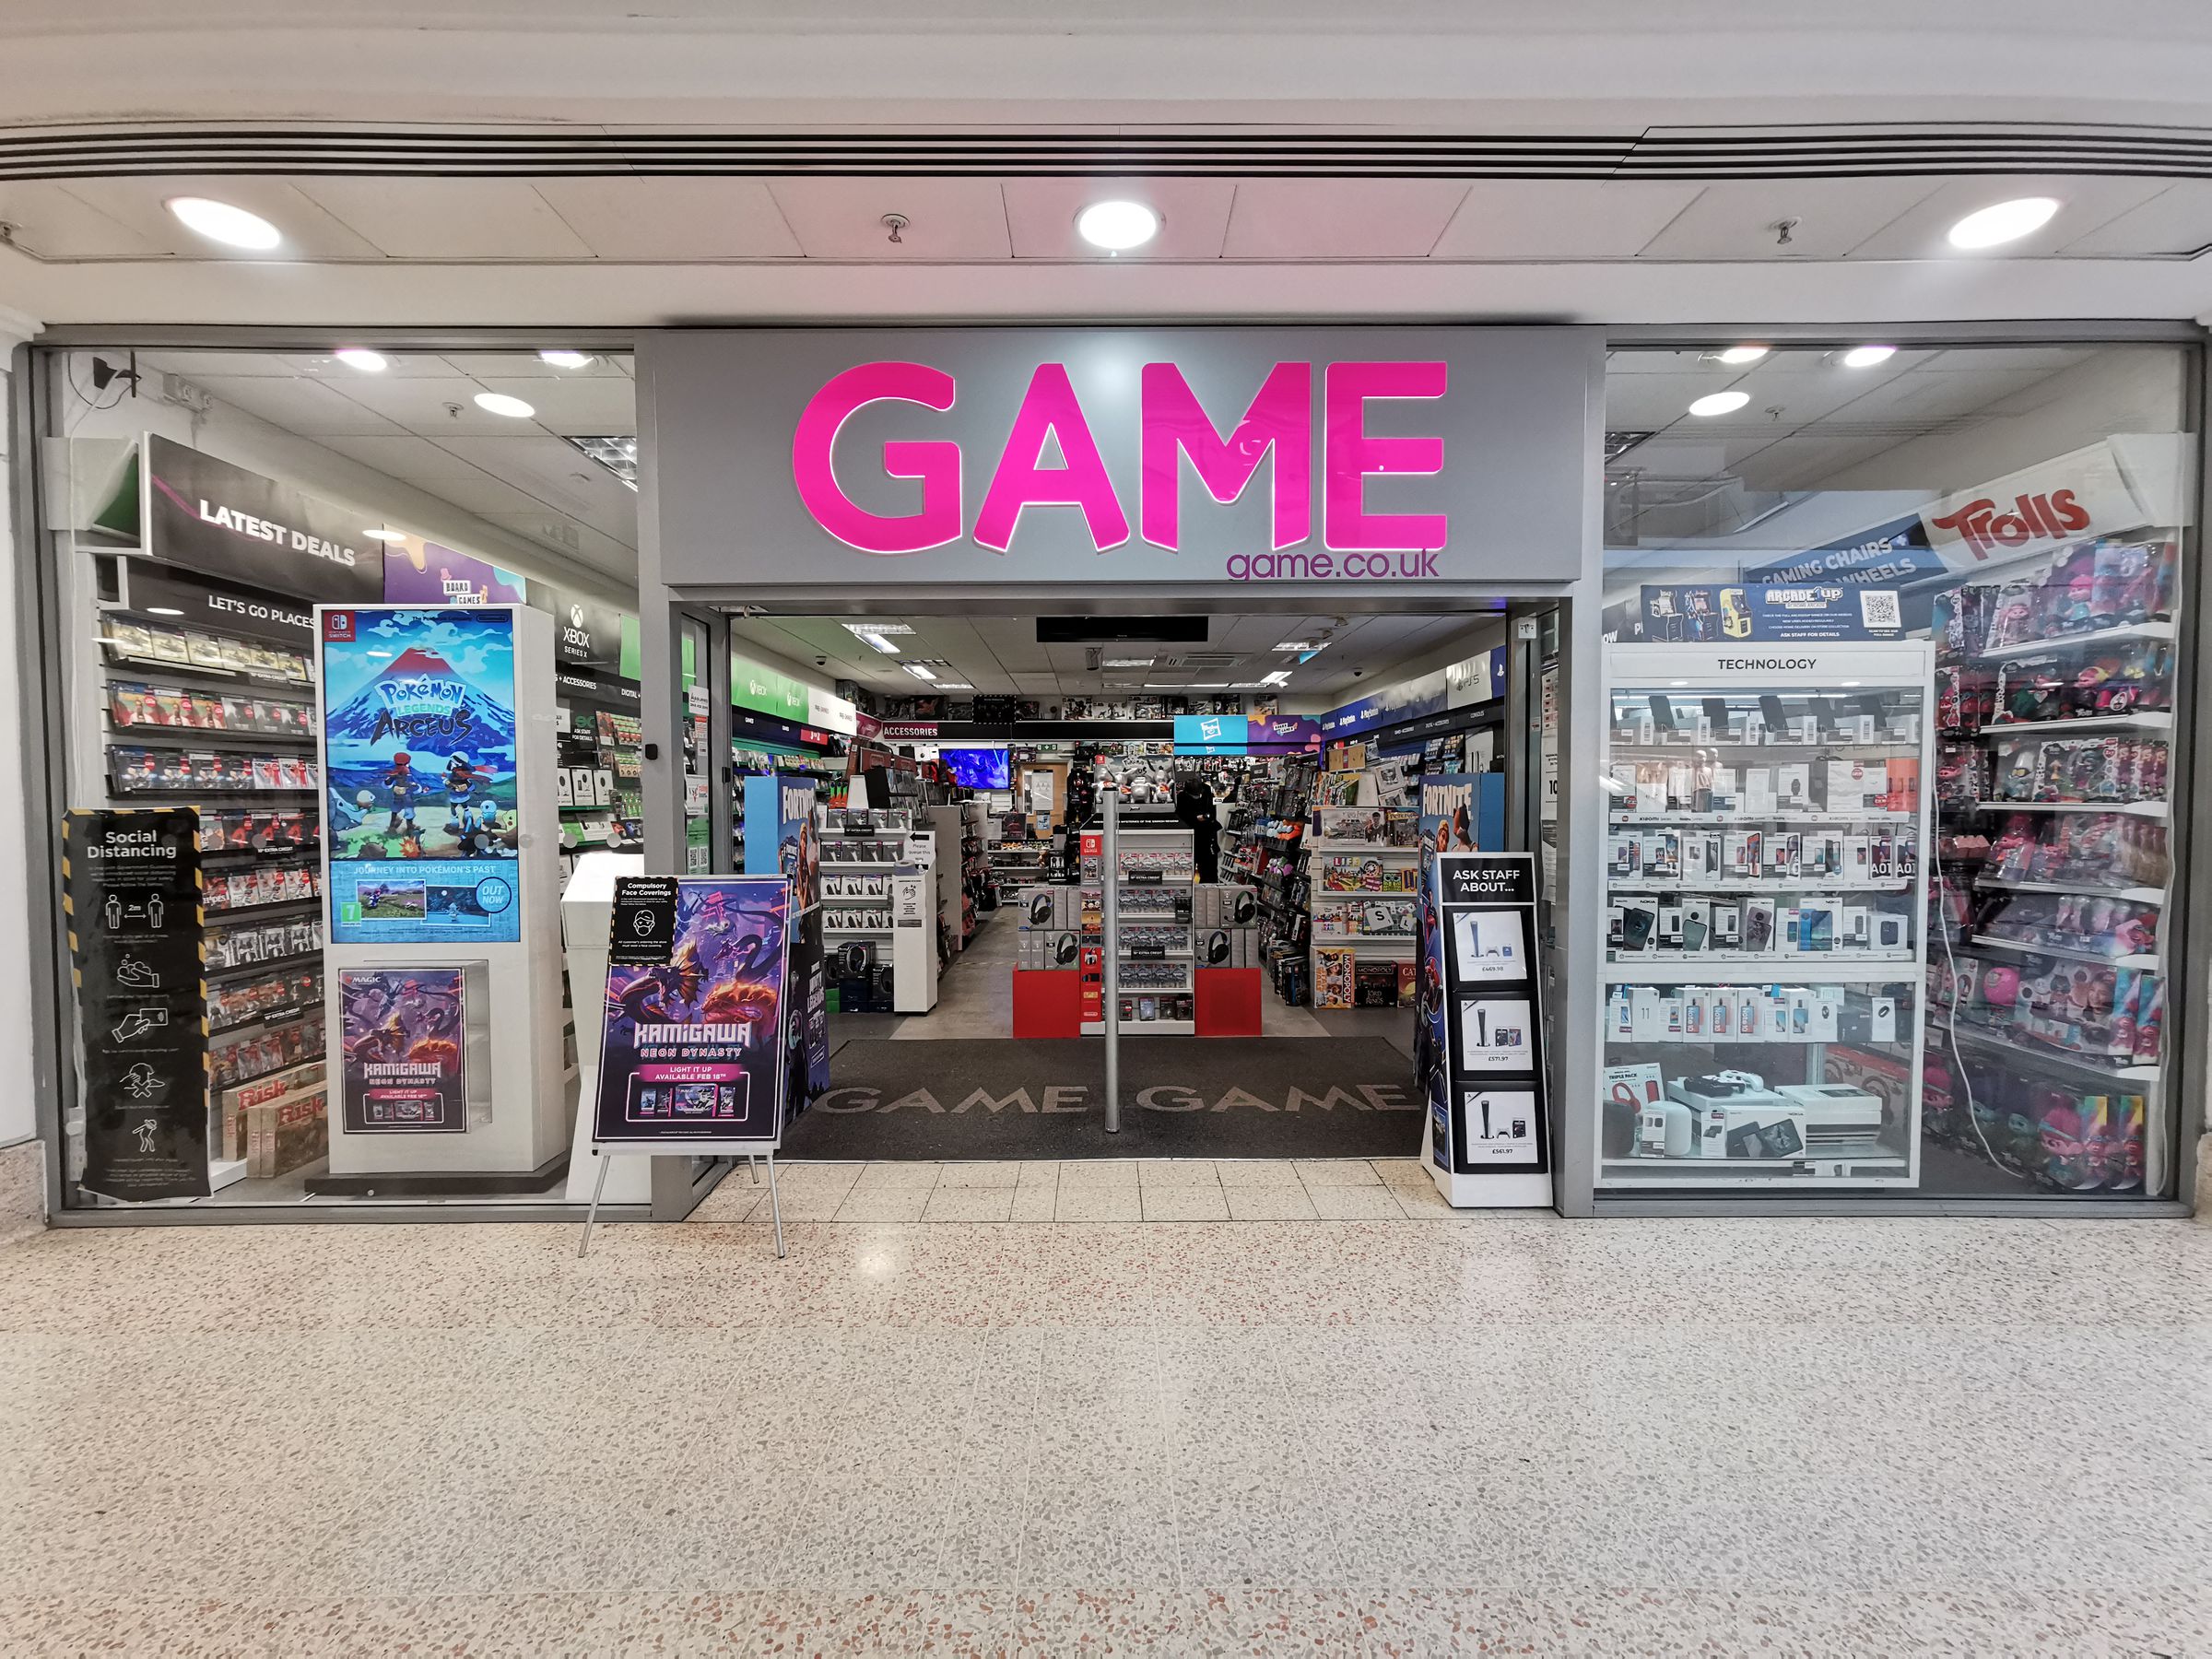 You’ll have to head to CeX instead for pre-owned games.